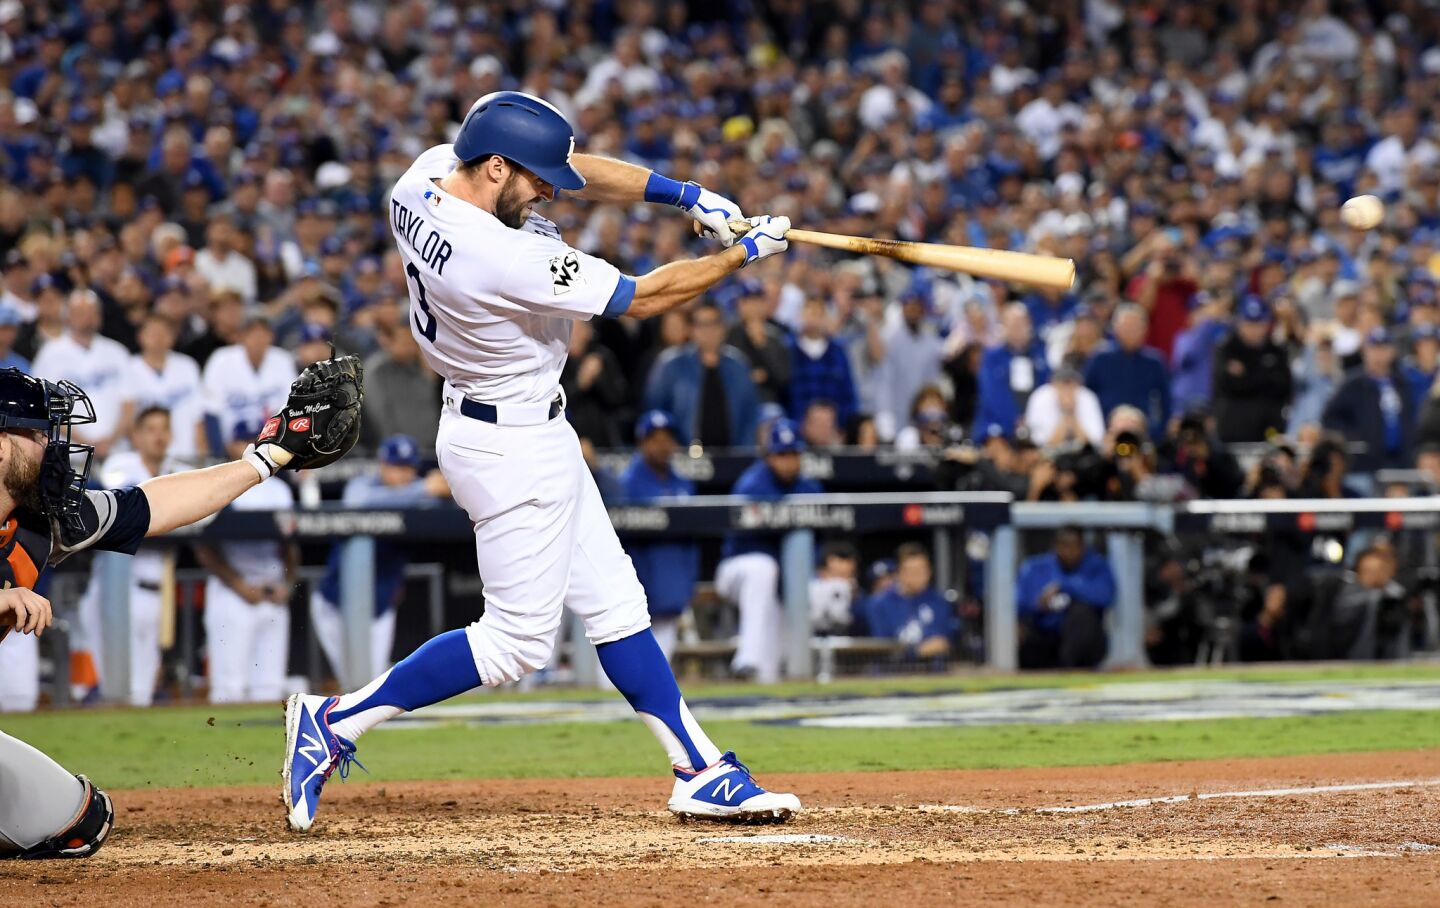 Chris Taylor hits an RBI single against the Astros in the sixth inning.